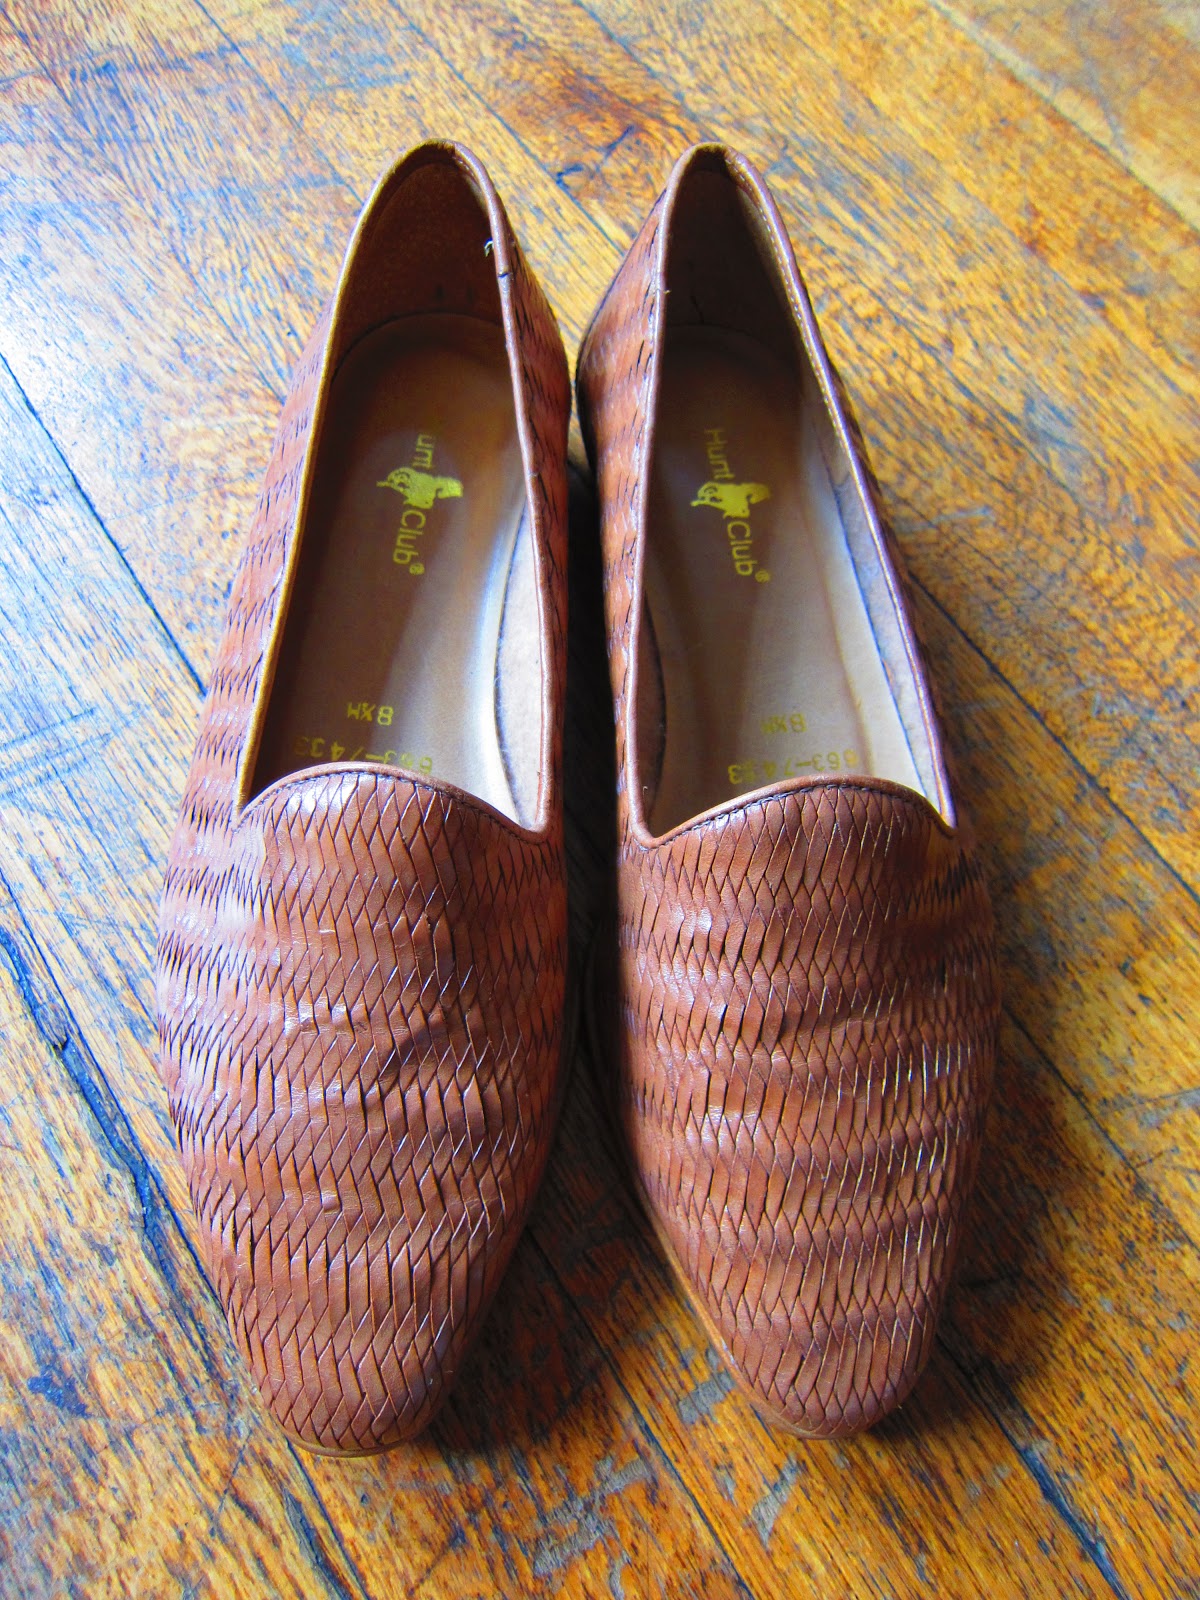 laws of general economy: Natural/ Tan woven leather flats